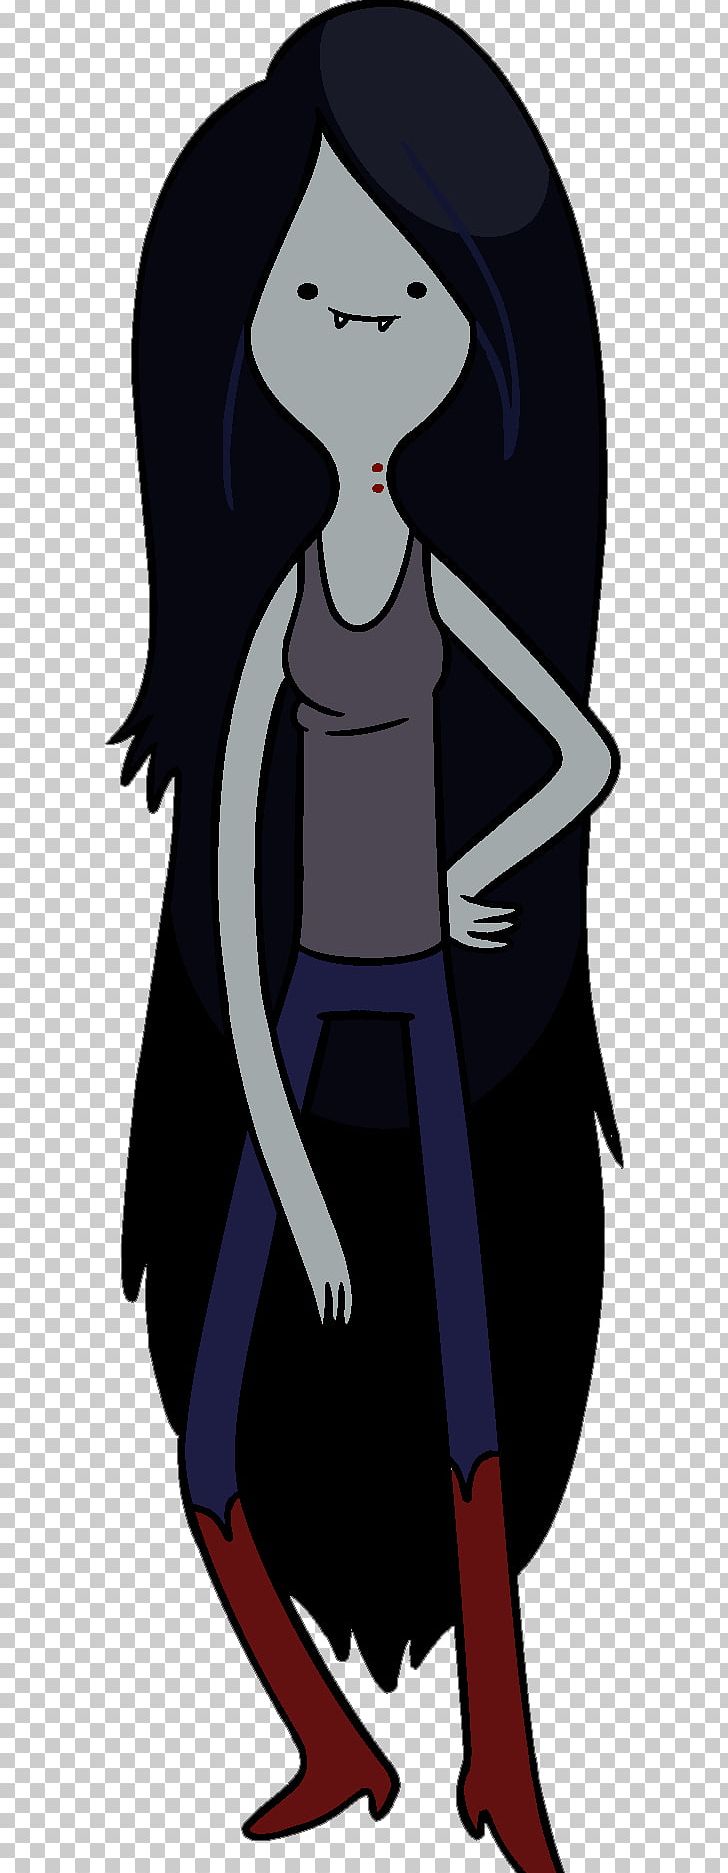 Marceline The Vampire Queen Princess Bubblegum Ice King Finn The Human PNG, Clipart, Adventure Time, Antagonist, Art, Black Hair, Cartoon Free PNG Download